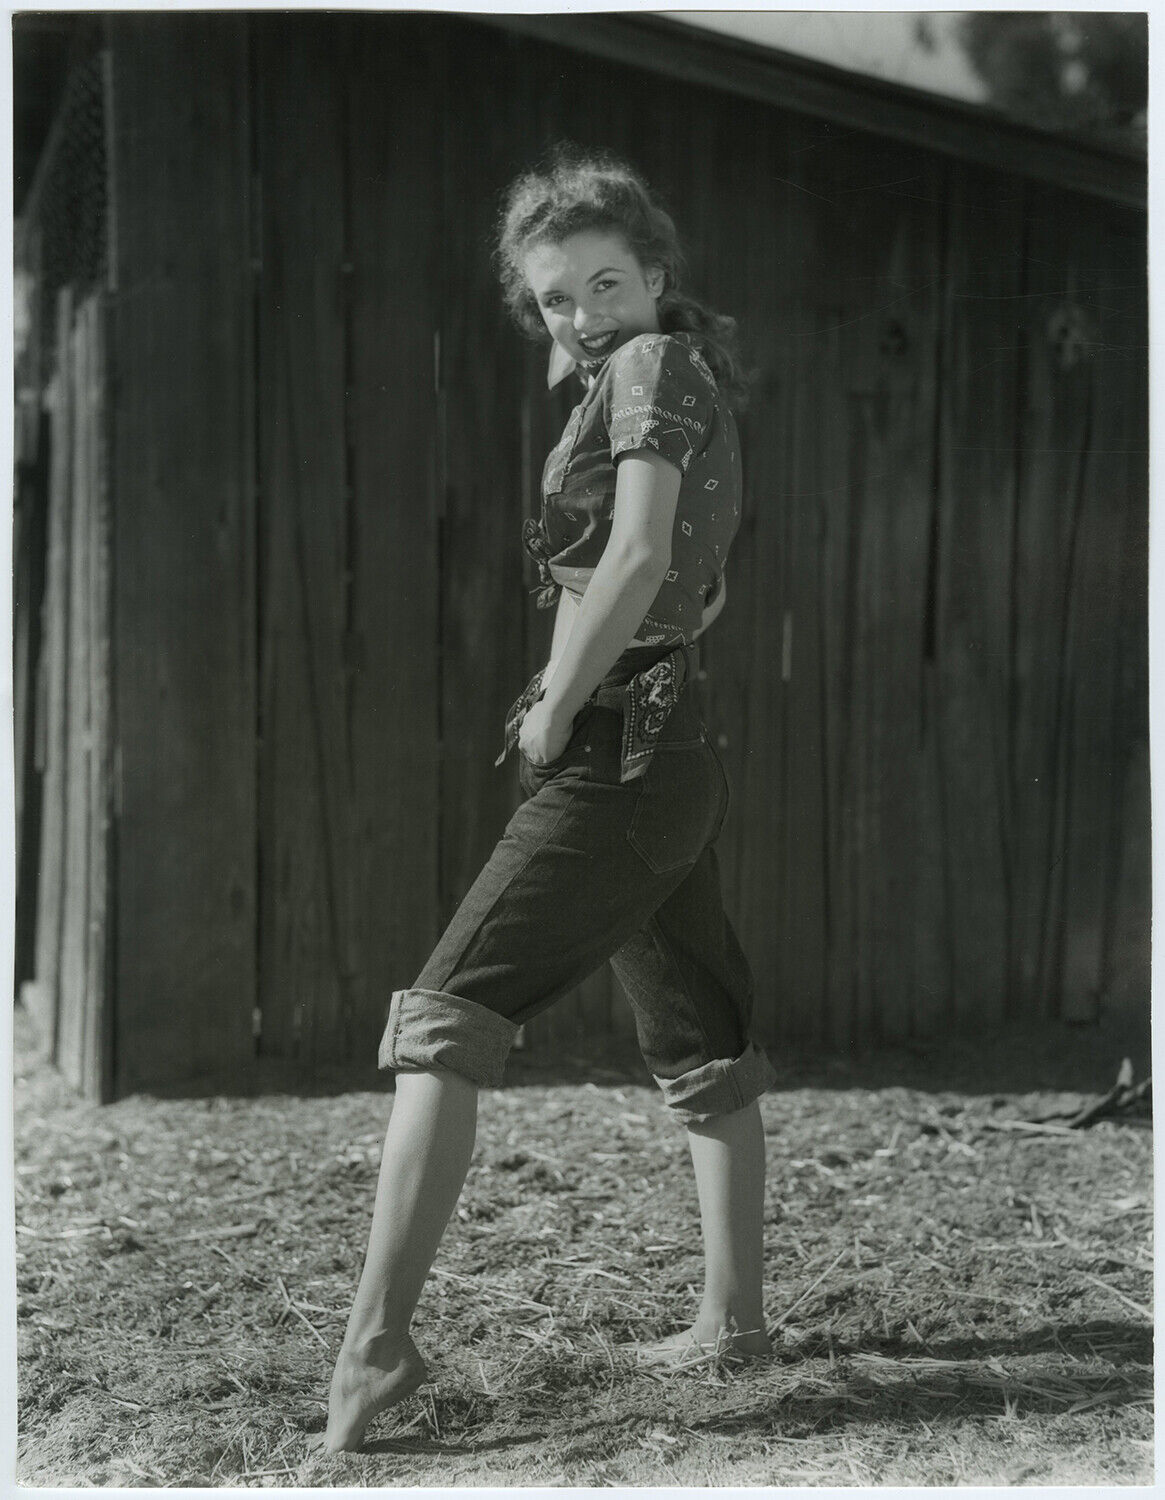 Barefoot Cowgirl Marilyn Monroe Large Original 1945 Andre De Dienes Photograph For Sale